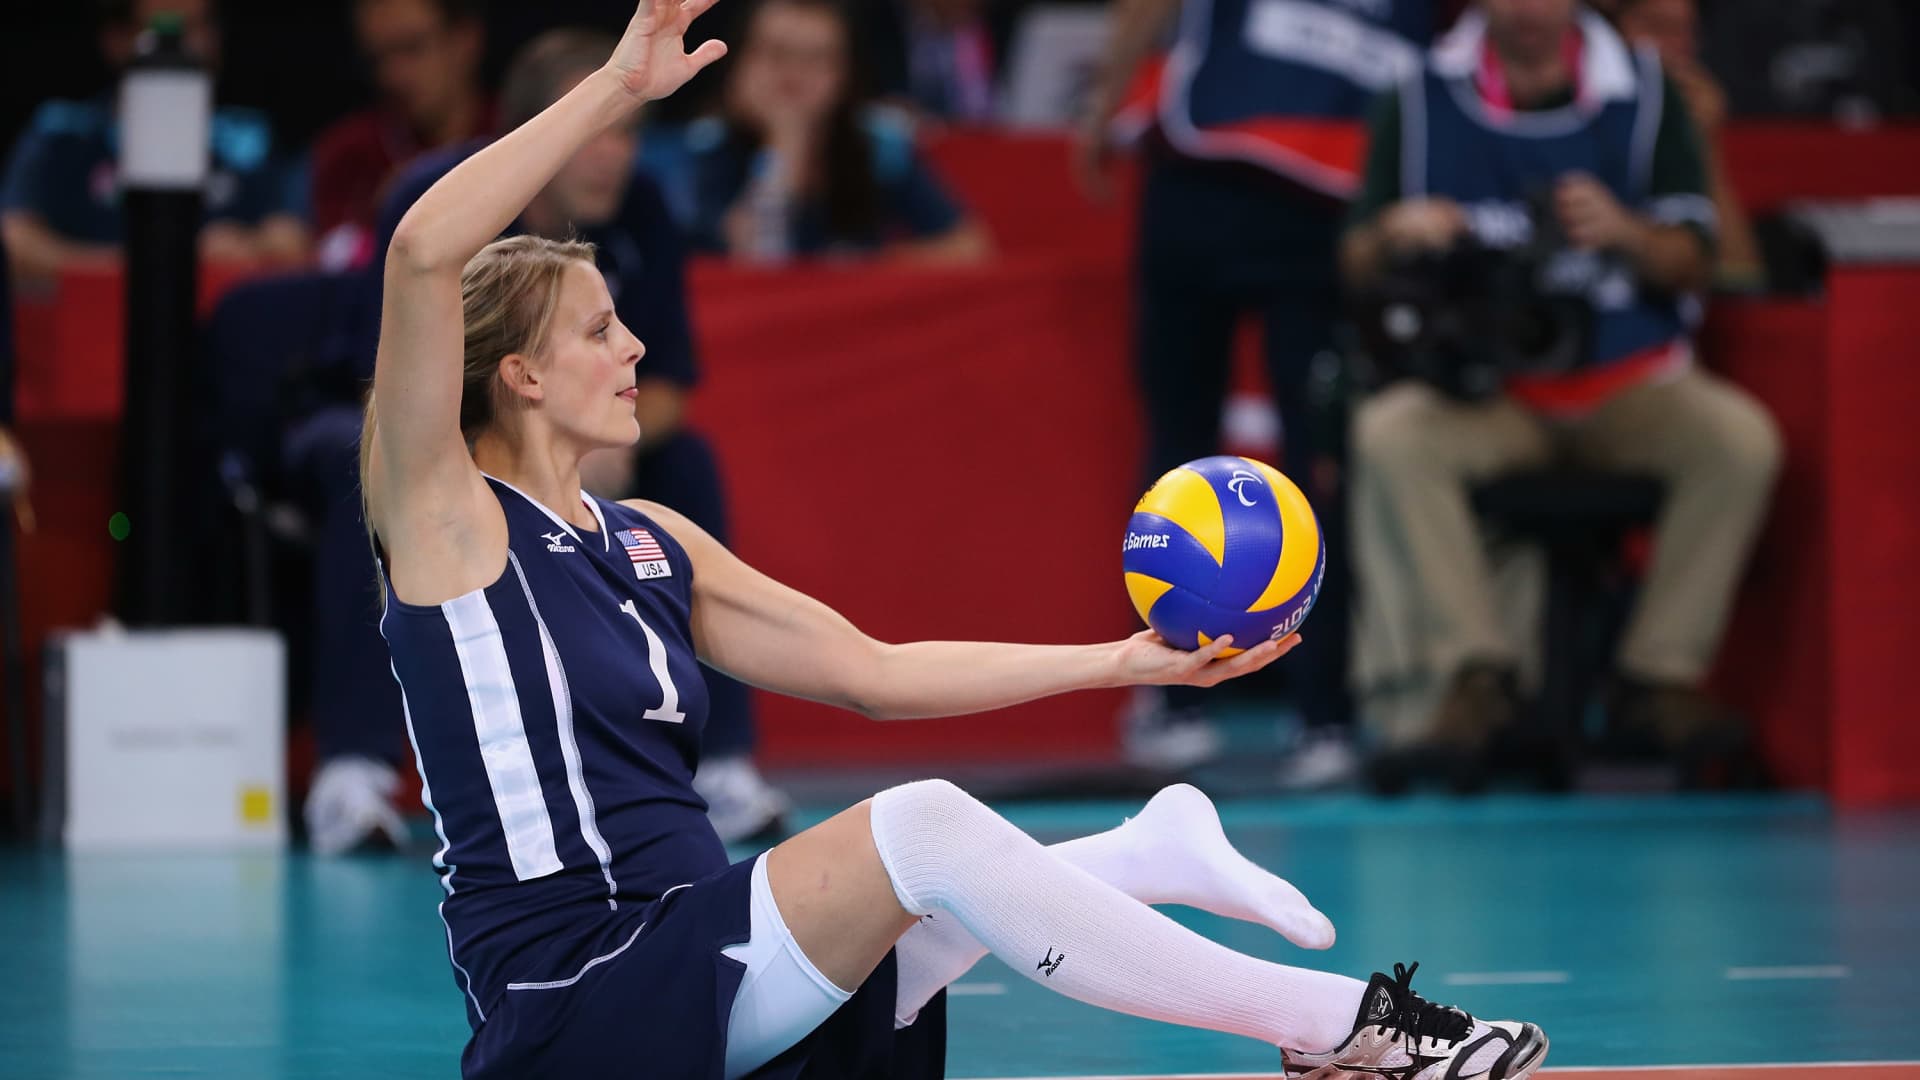 Lora Webster of The United States plays a shot during the Women's Sitting Volleyball final Gold Medal match against China on day 9 of the London 2012 Paralympic Games.